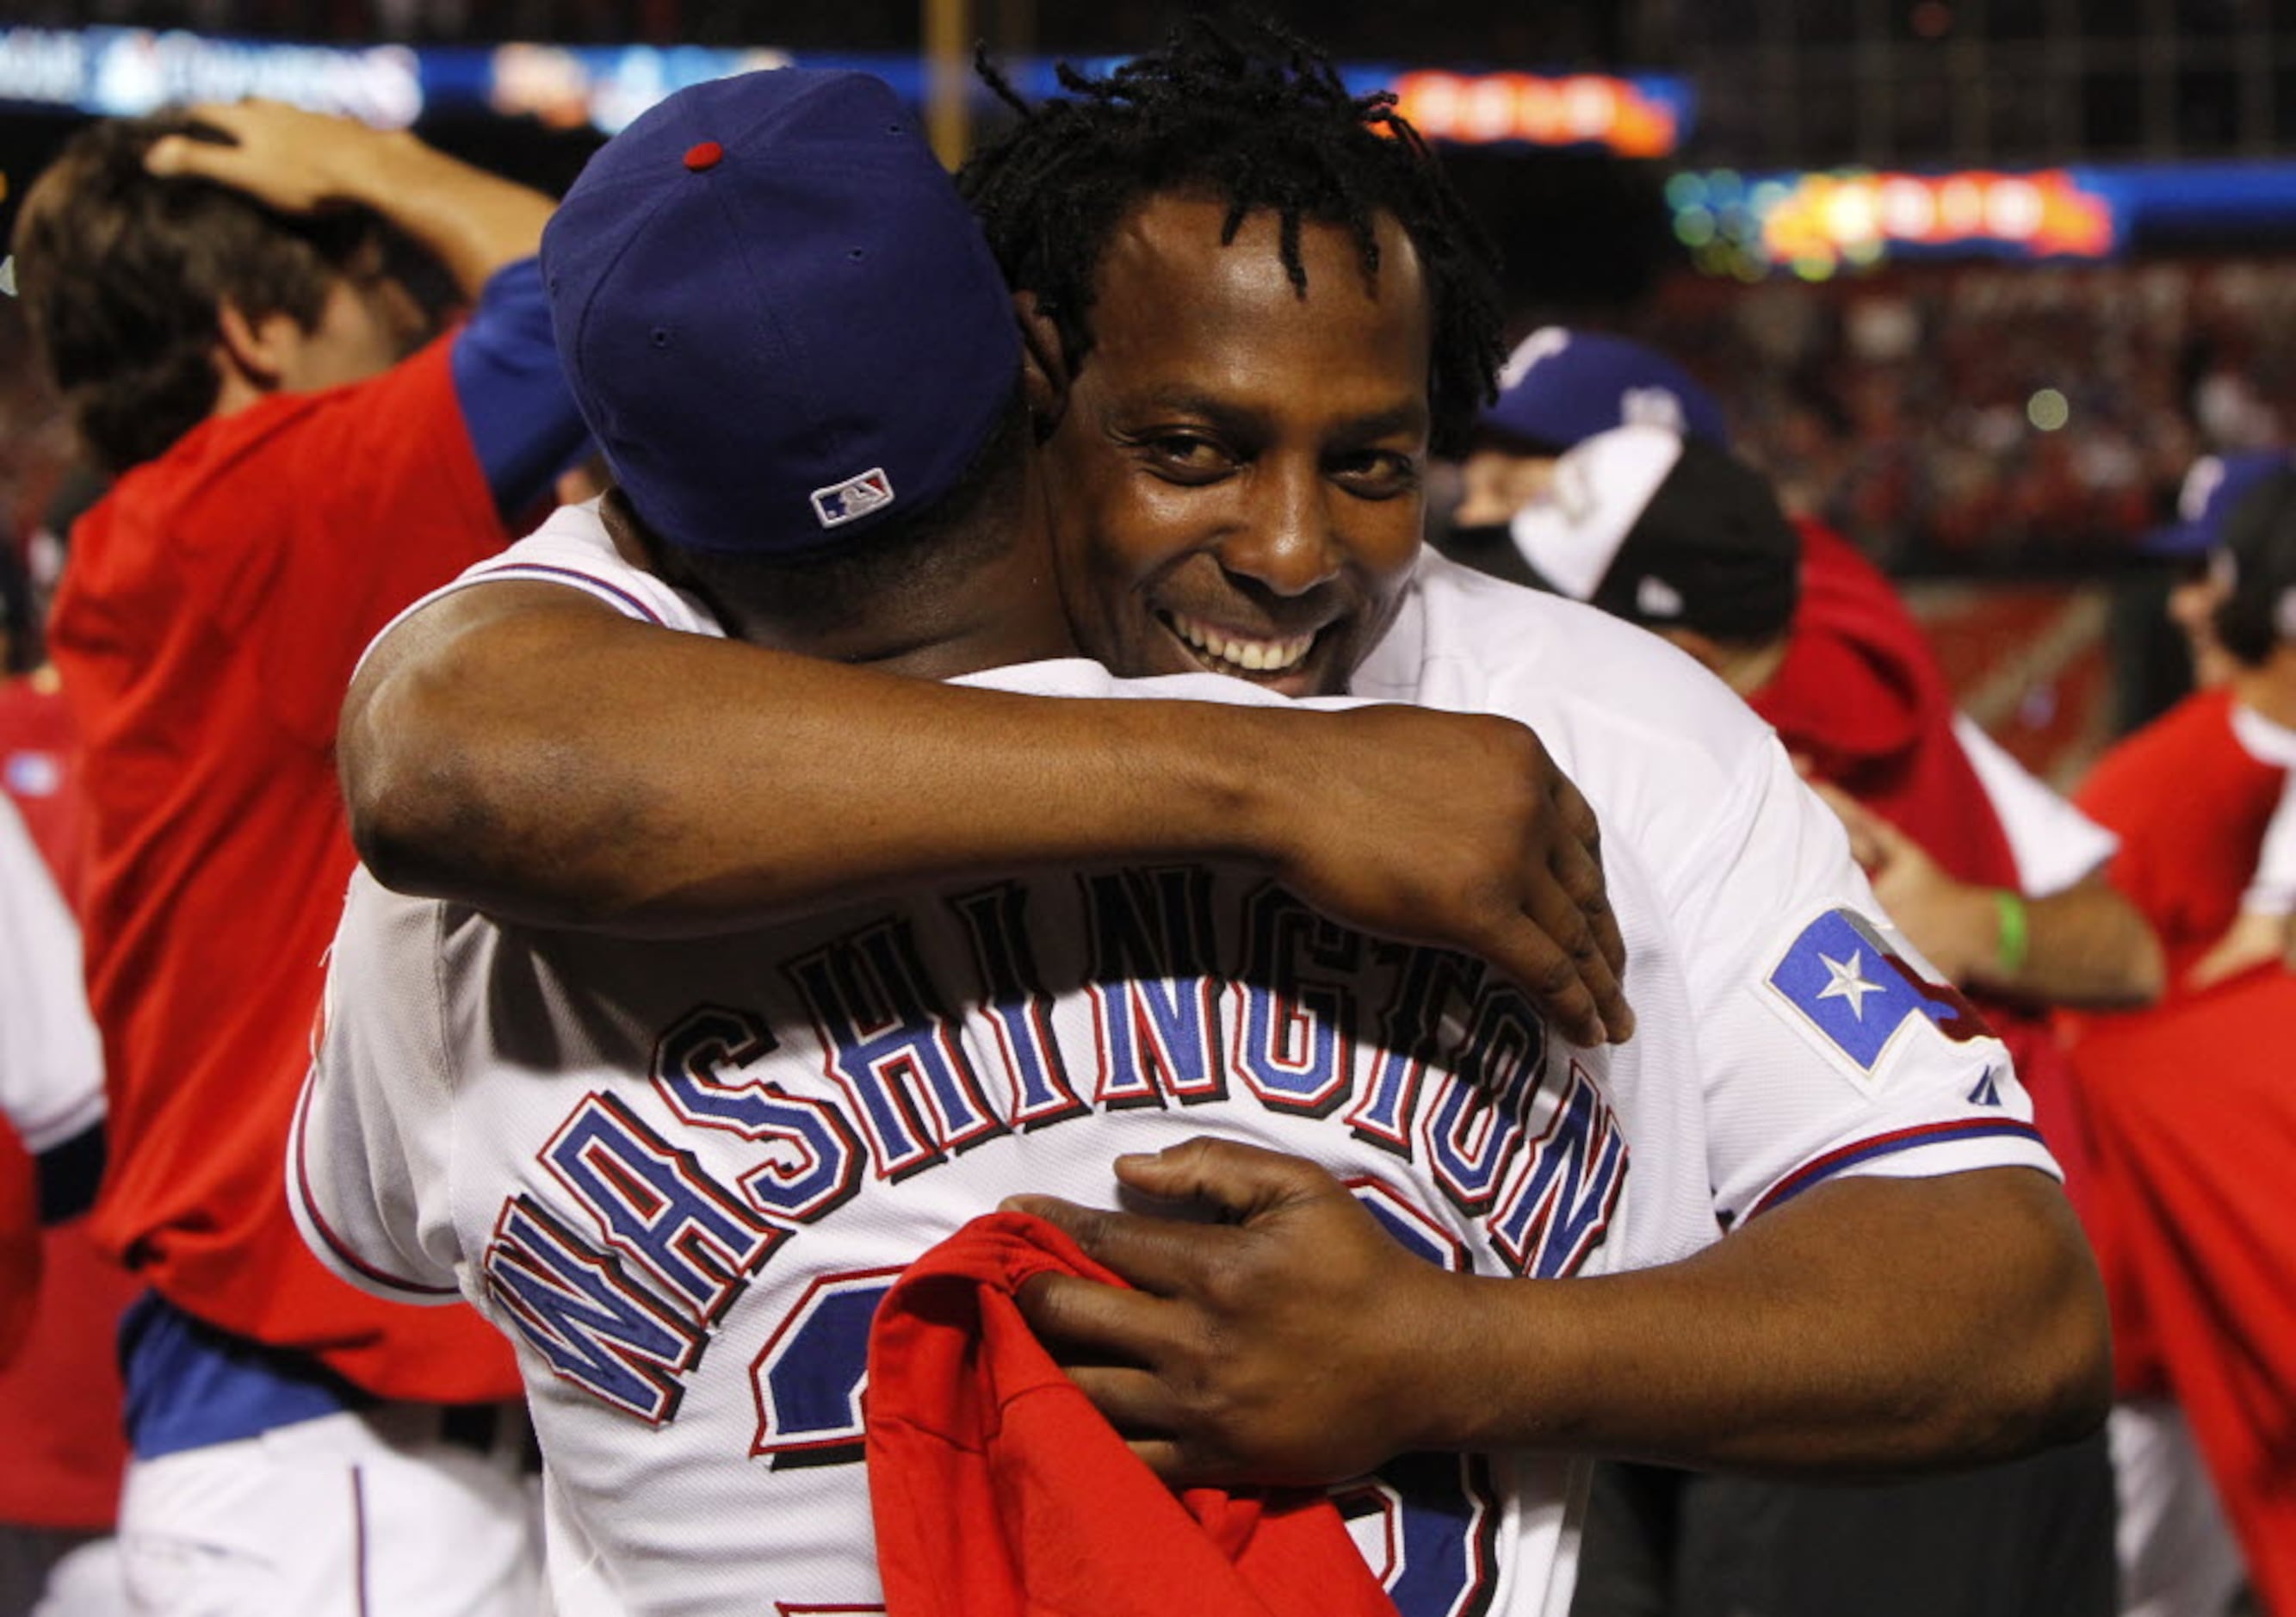 Rangers appear to be leader to sign Vladimir Guerrero's son, Pablo Guerrero